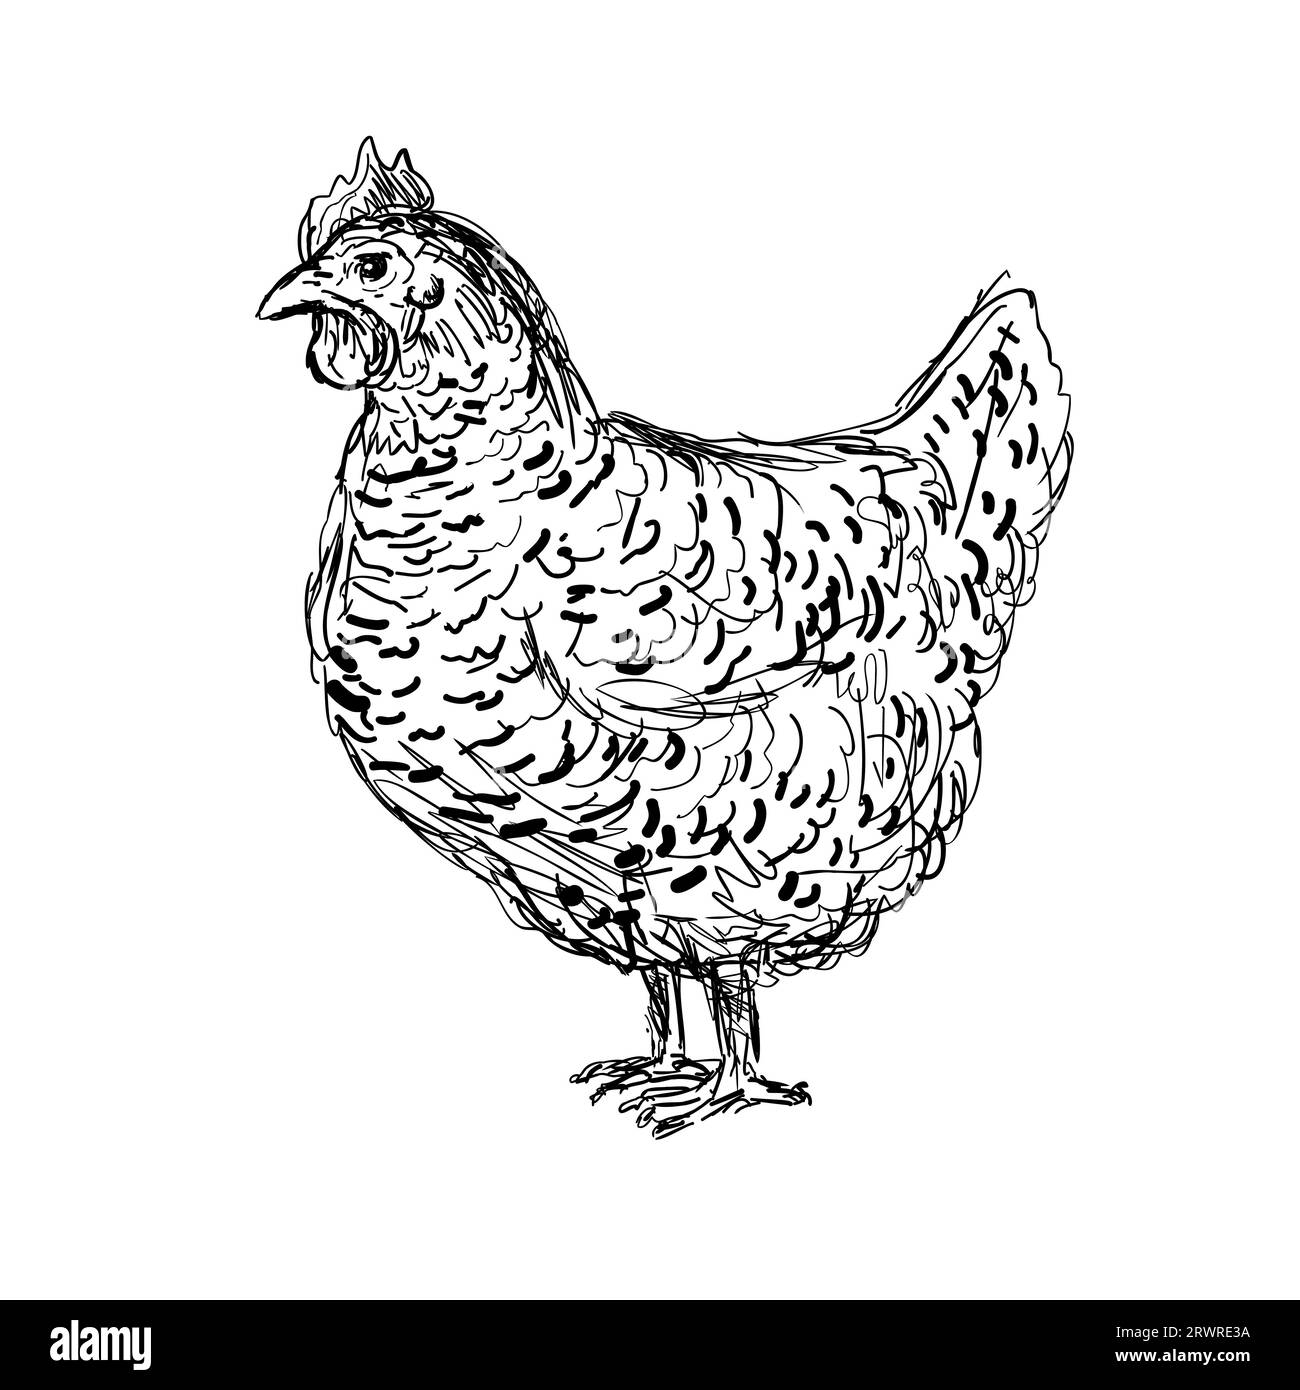 Drawing sketch style illustration of an Plymouth Rock, Rock, Barred Rock hen, an American breed of domestic chicken viewed from side on isolated white Stock Photo